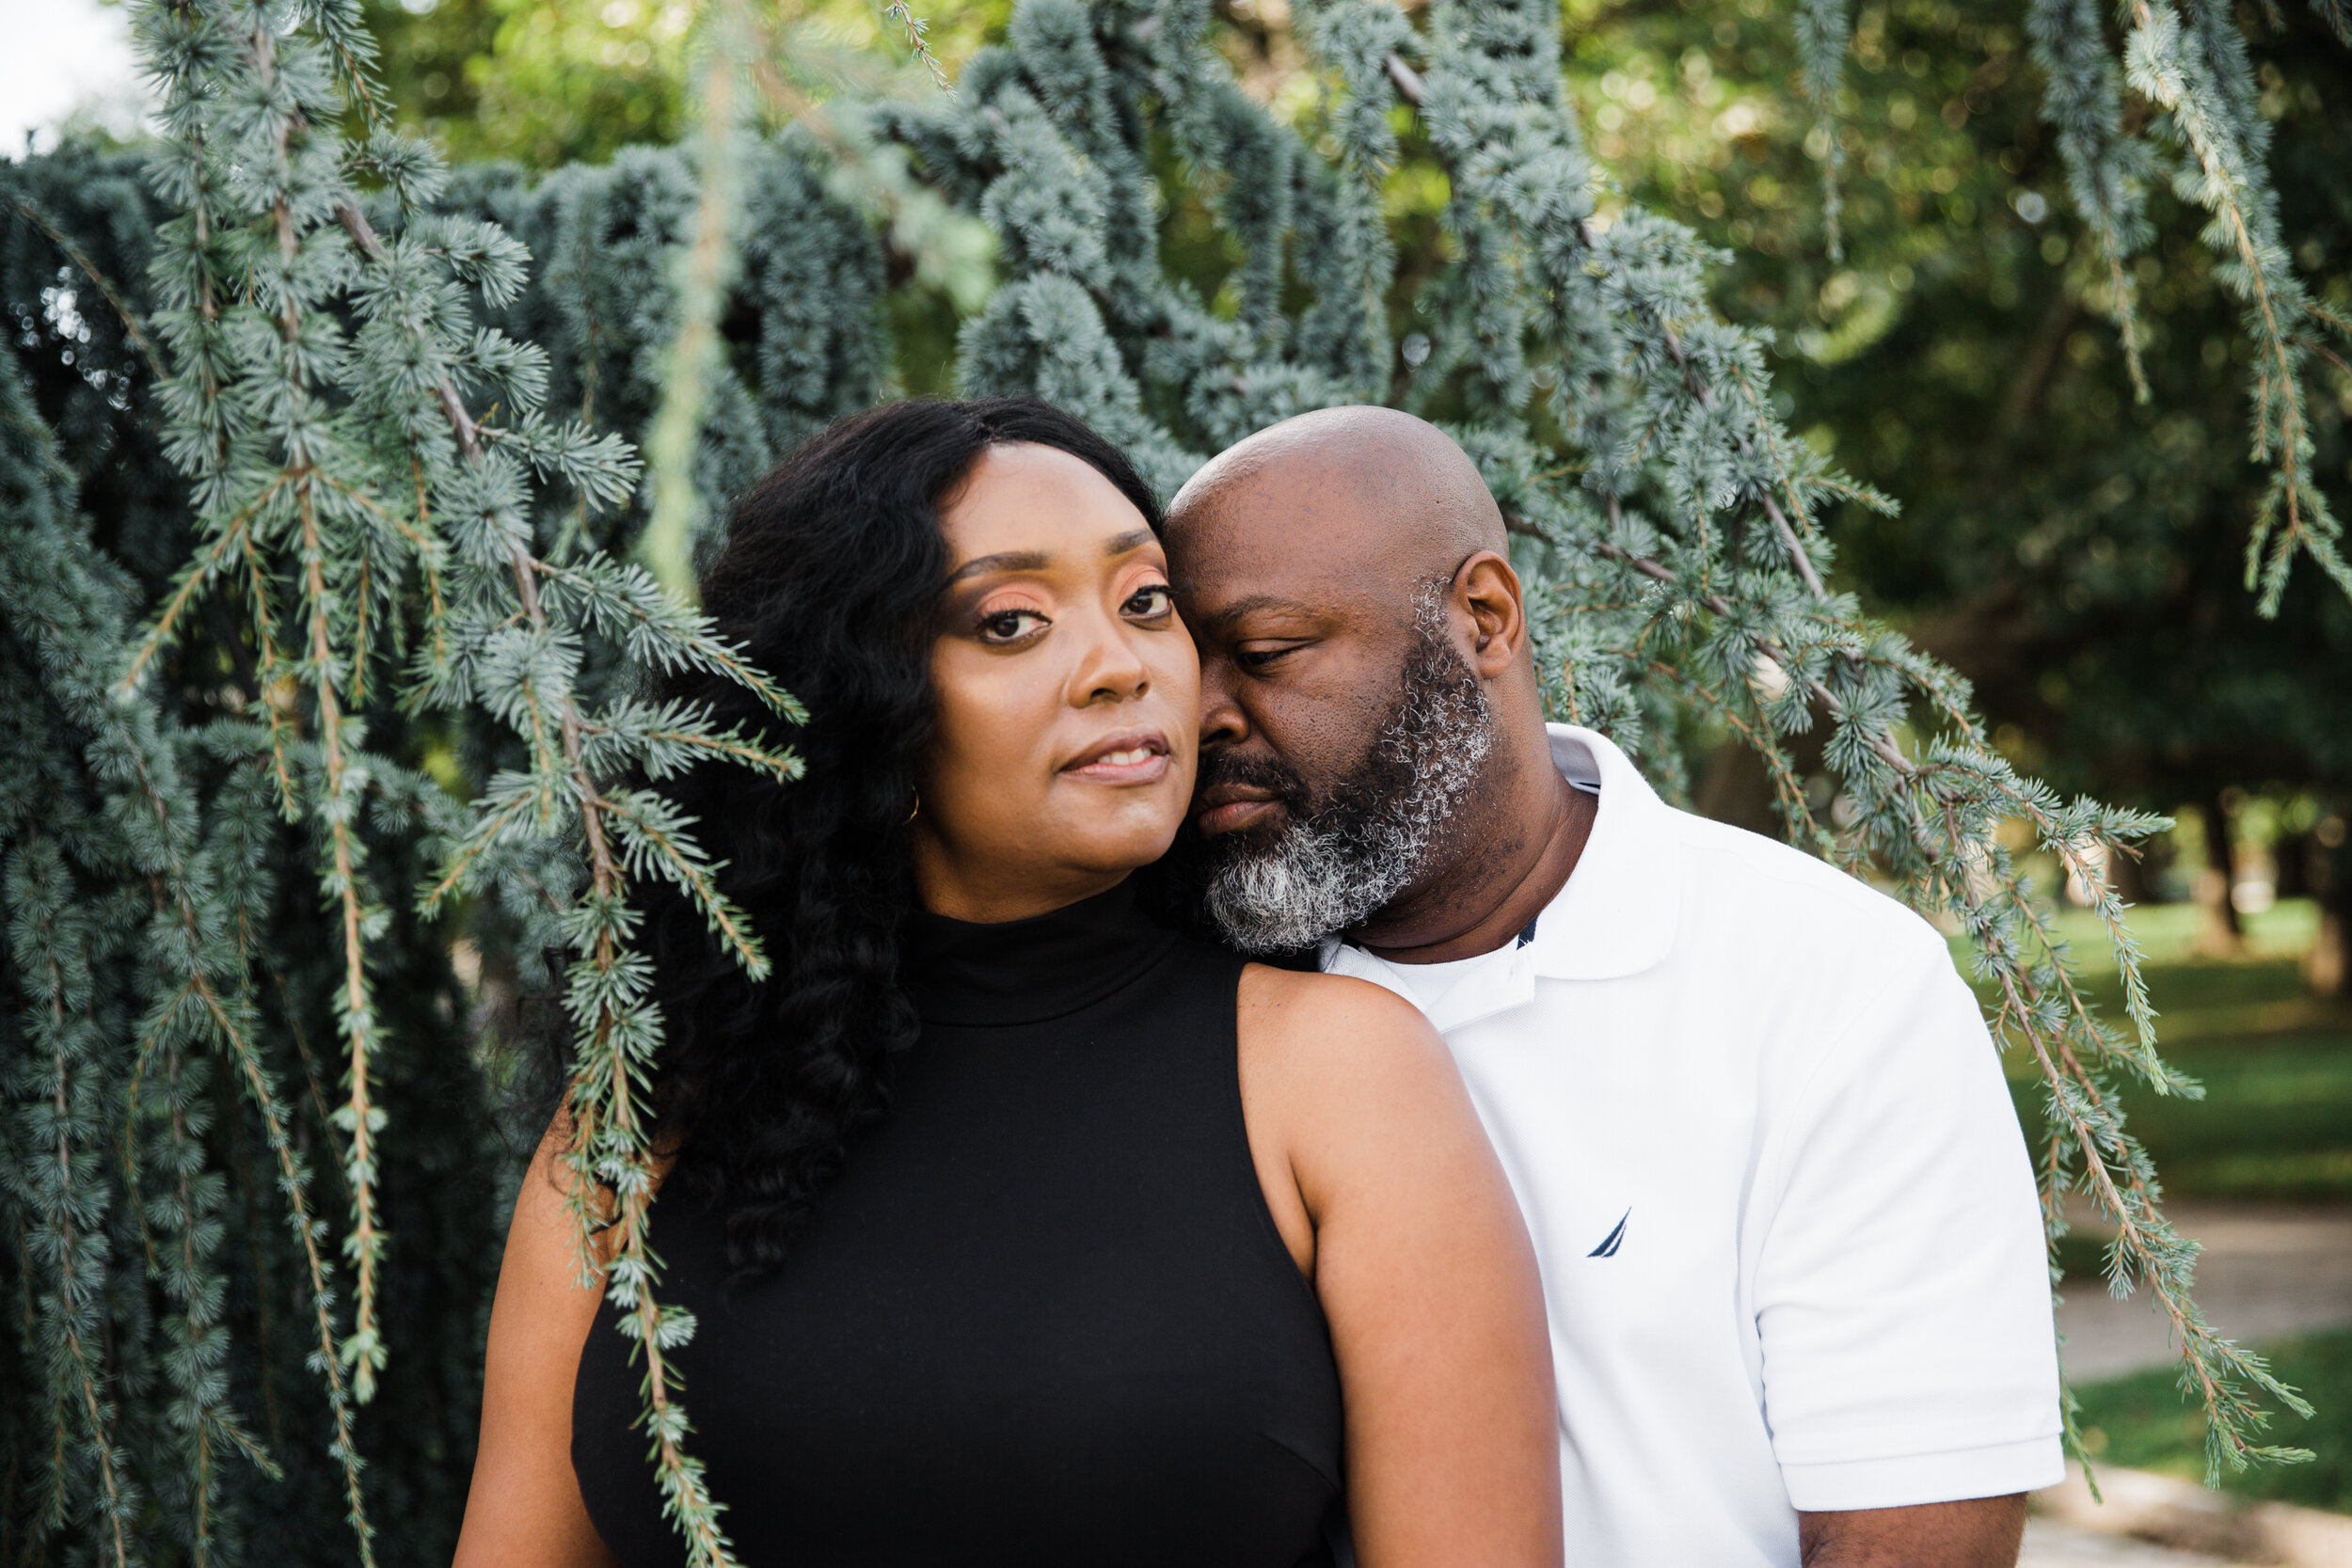 Patterson Park Engagement Session with Black Photographers Megapixels media in Baltimore Maryland (14 of 32).jpg